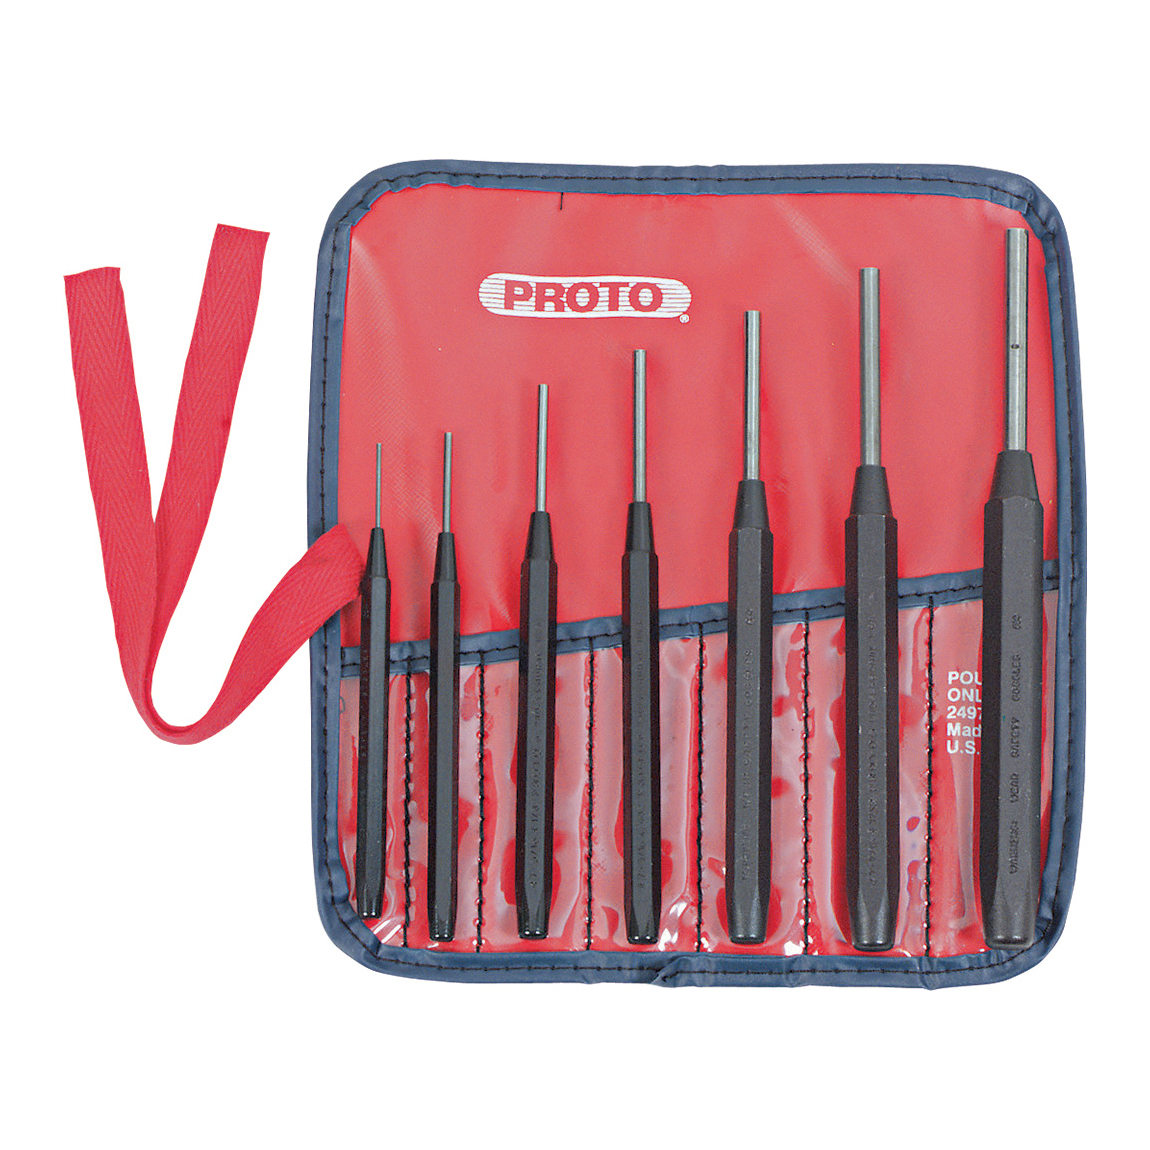 7 Piece Drive Pin Punch Set - SIDCHROME Tools & Tool Storage